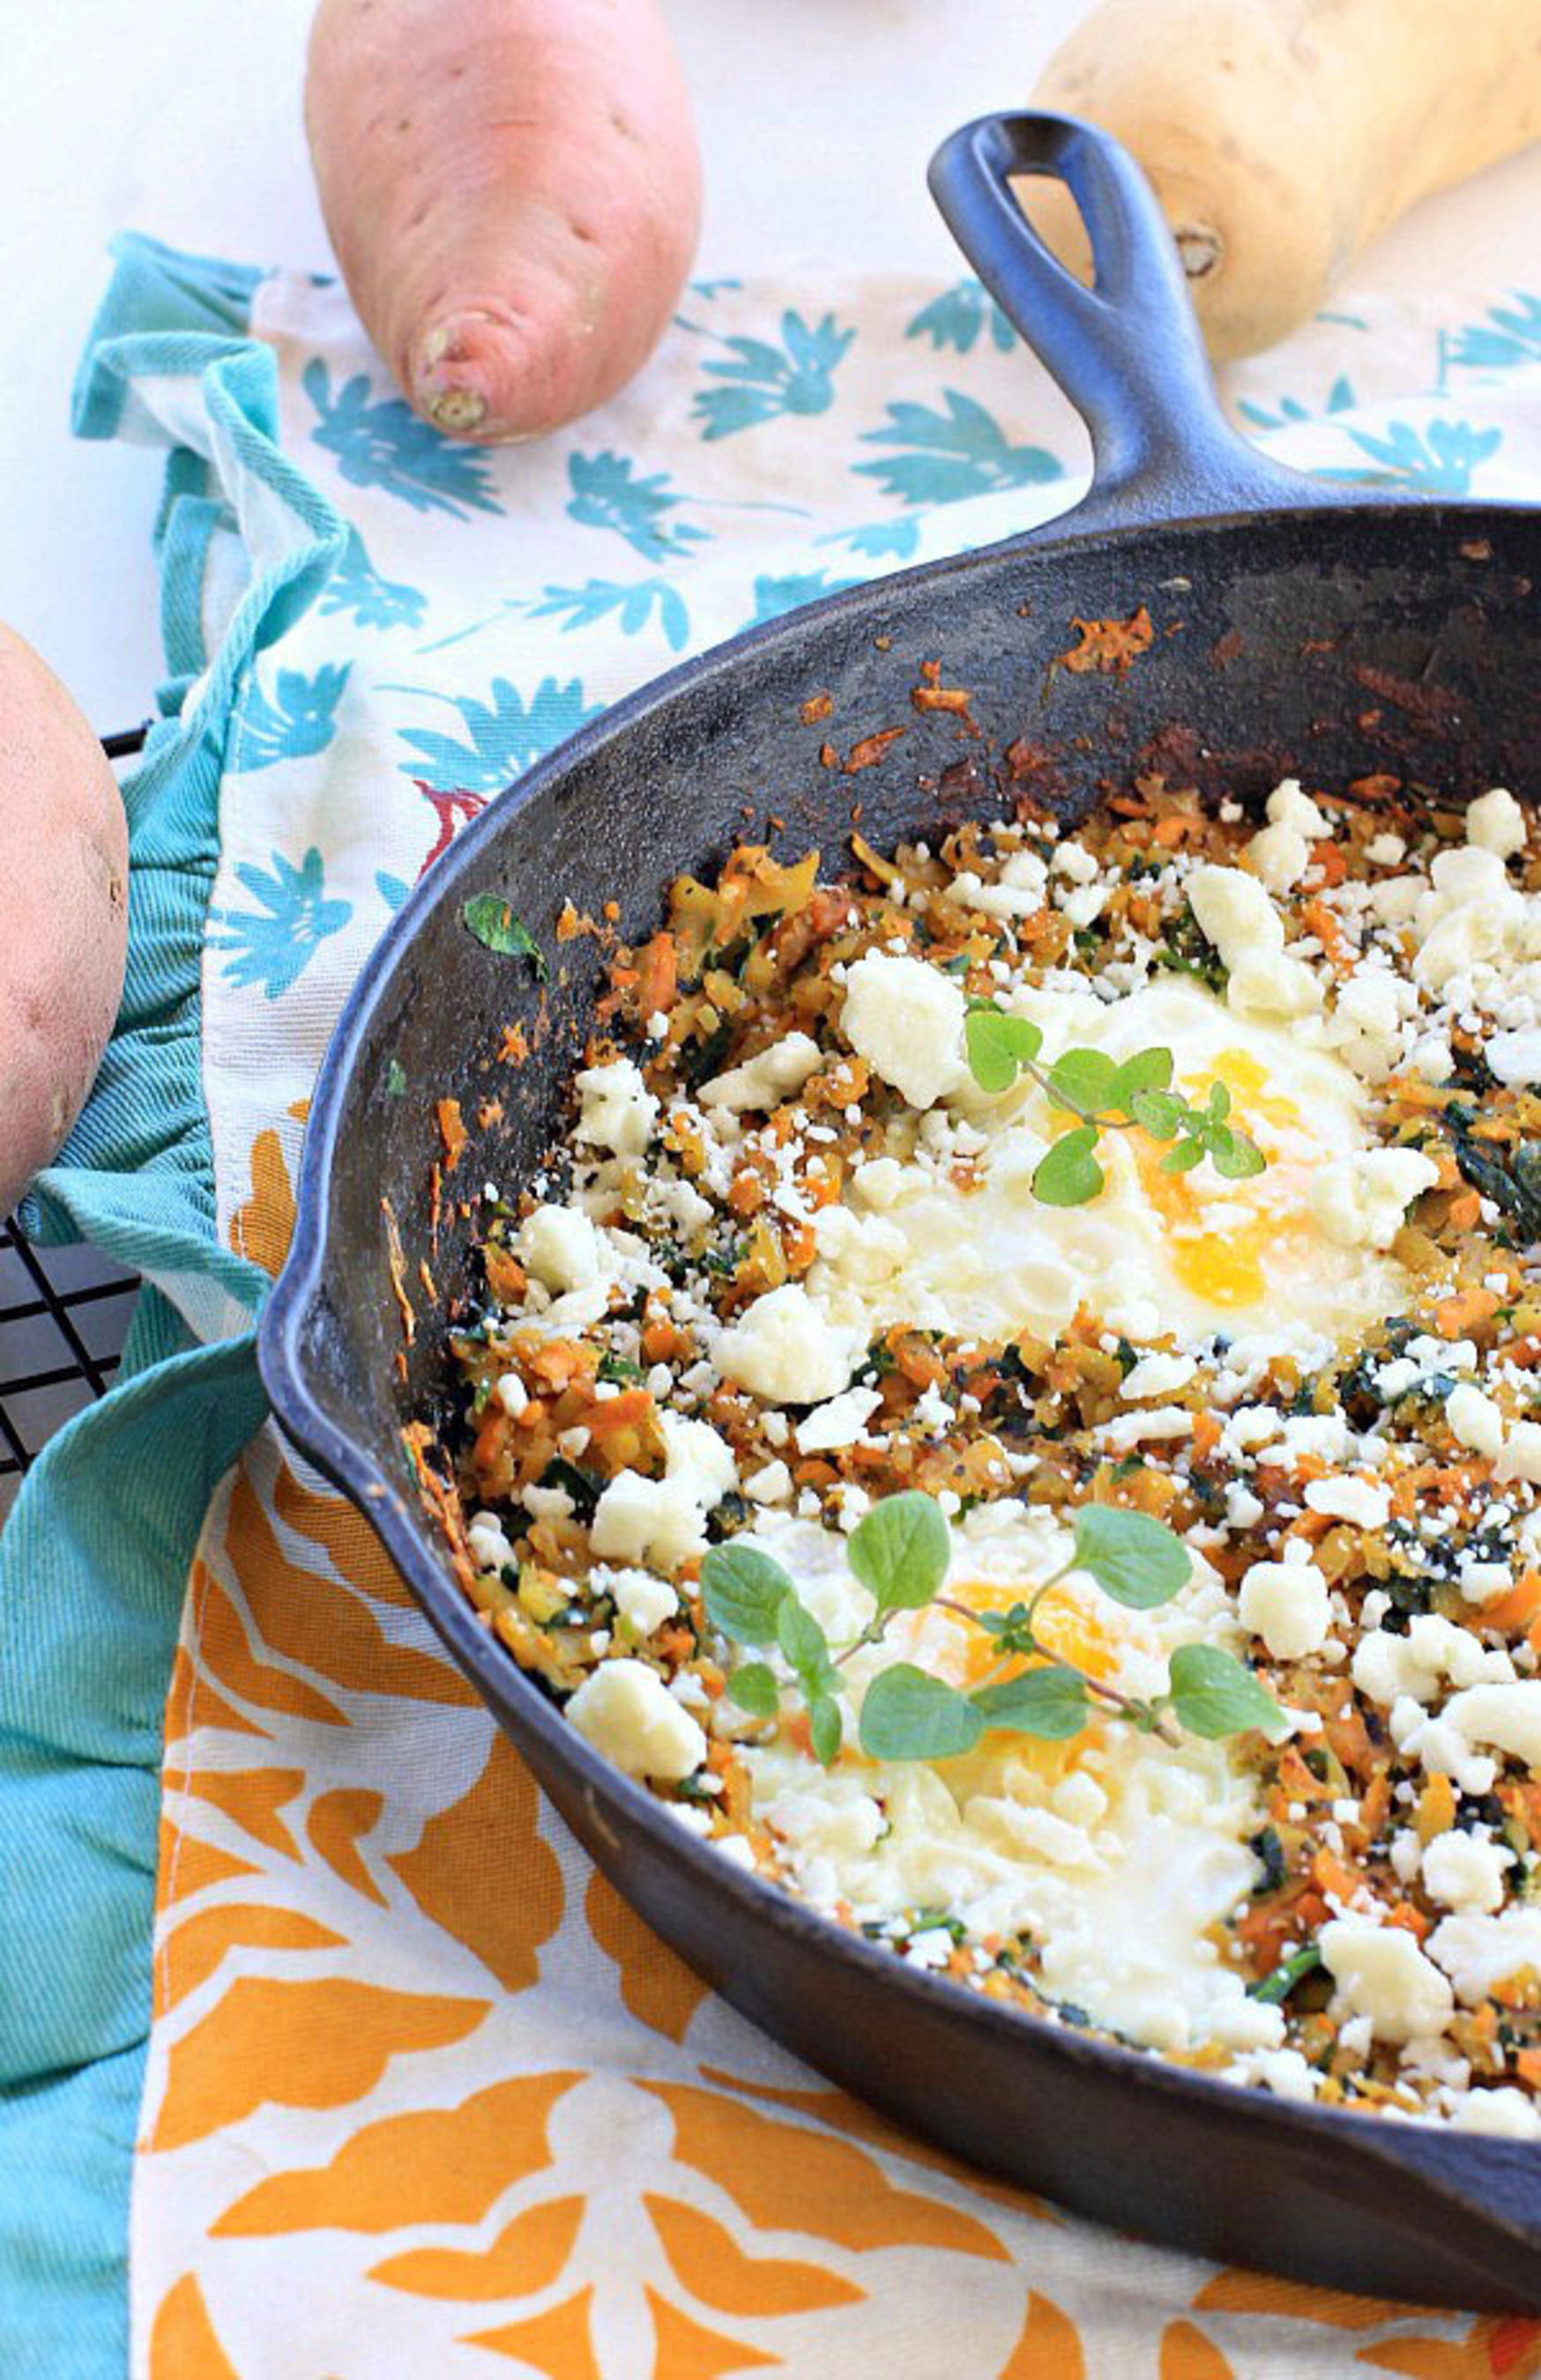 Check out this California Sweetpotato Hash with Eggs and Feta! (PRNewsFoto/The California Sweetpotato Council) (PRNewsFoto/CALIFORNIA SWEETPOTATO COUNCIL)